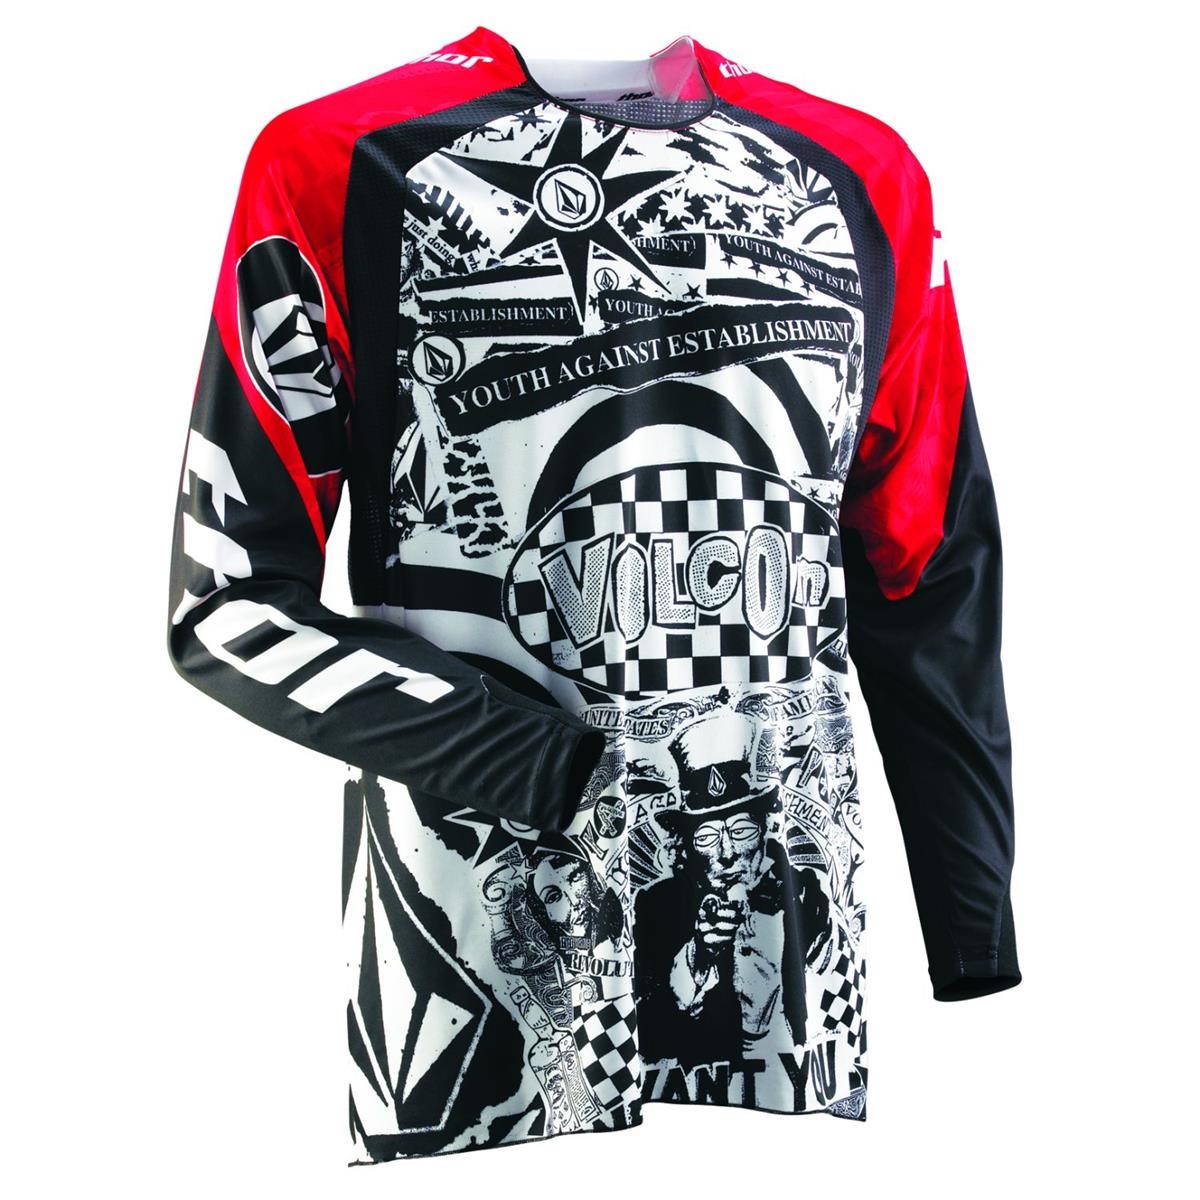 Motocross/MTB Bekleidung-MX Jersey - Thor Jersey Core Volcom-Limited Edition